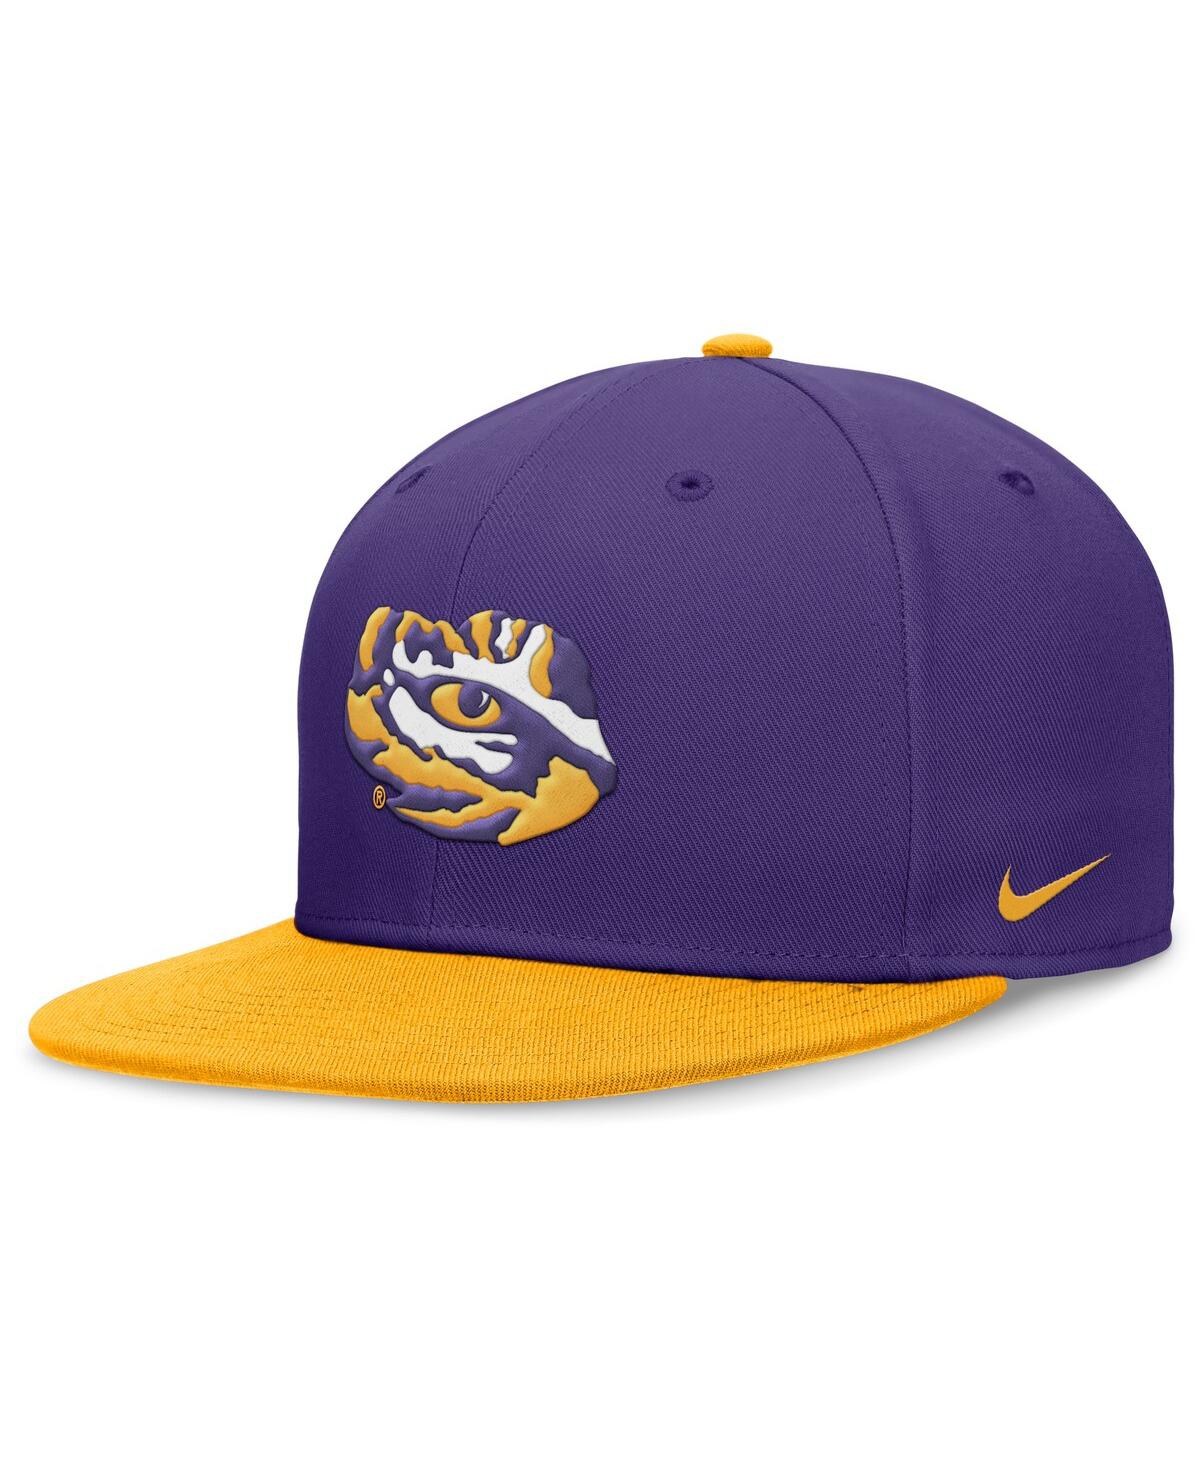 Men's Purple/Gold Lsu Tigers Performance Fitted Hat - Purple, Gold